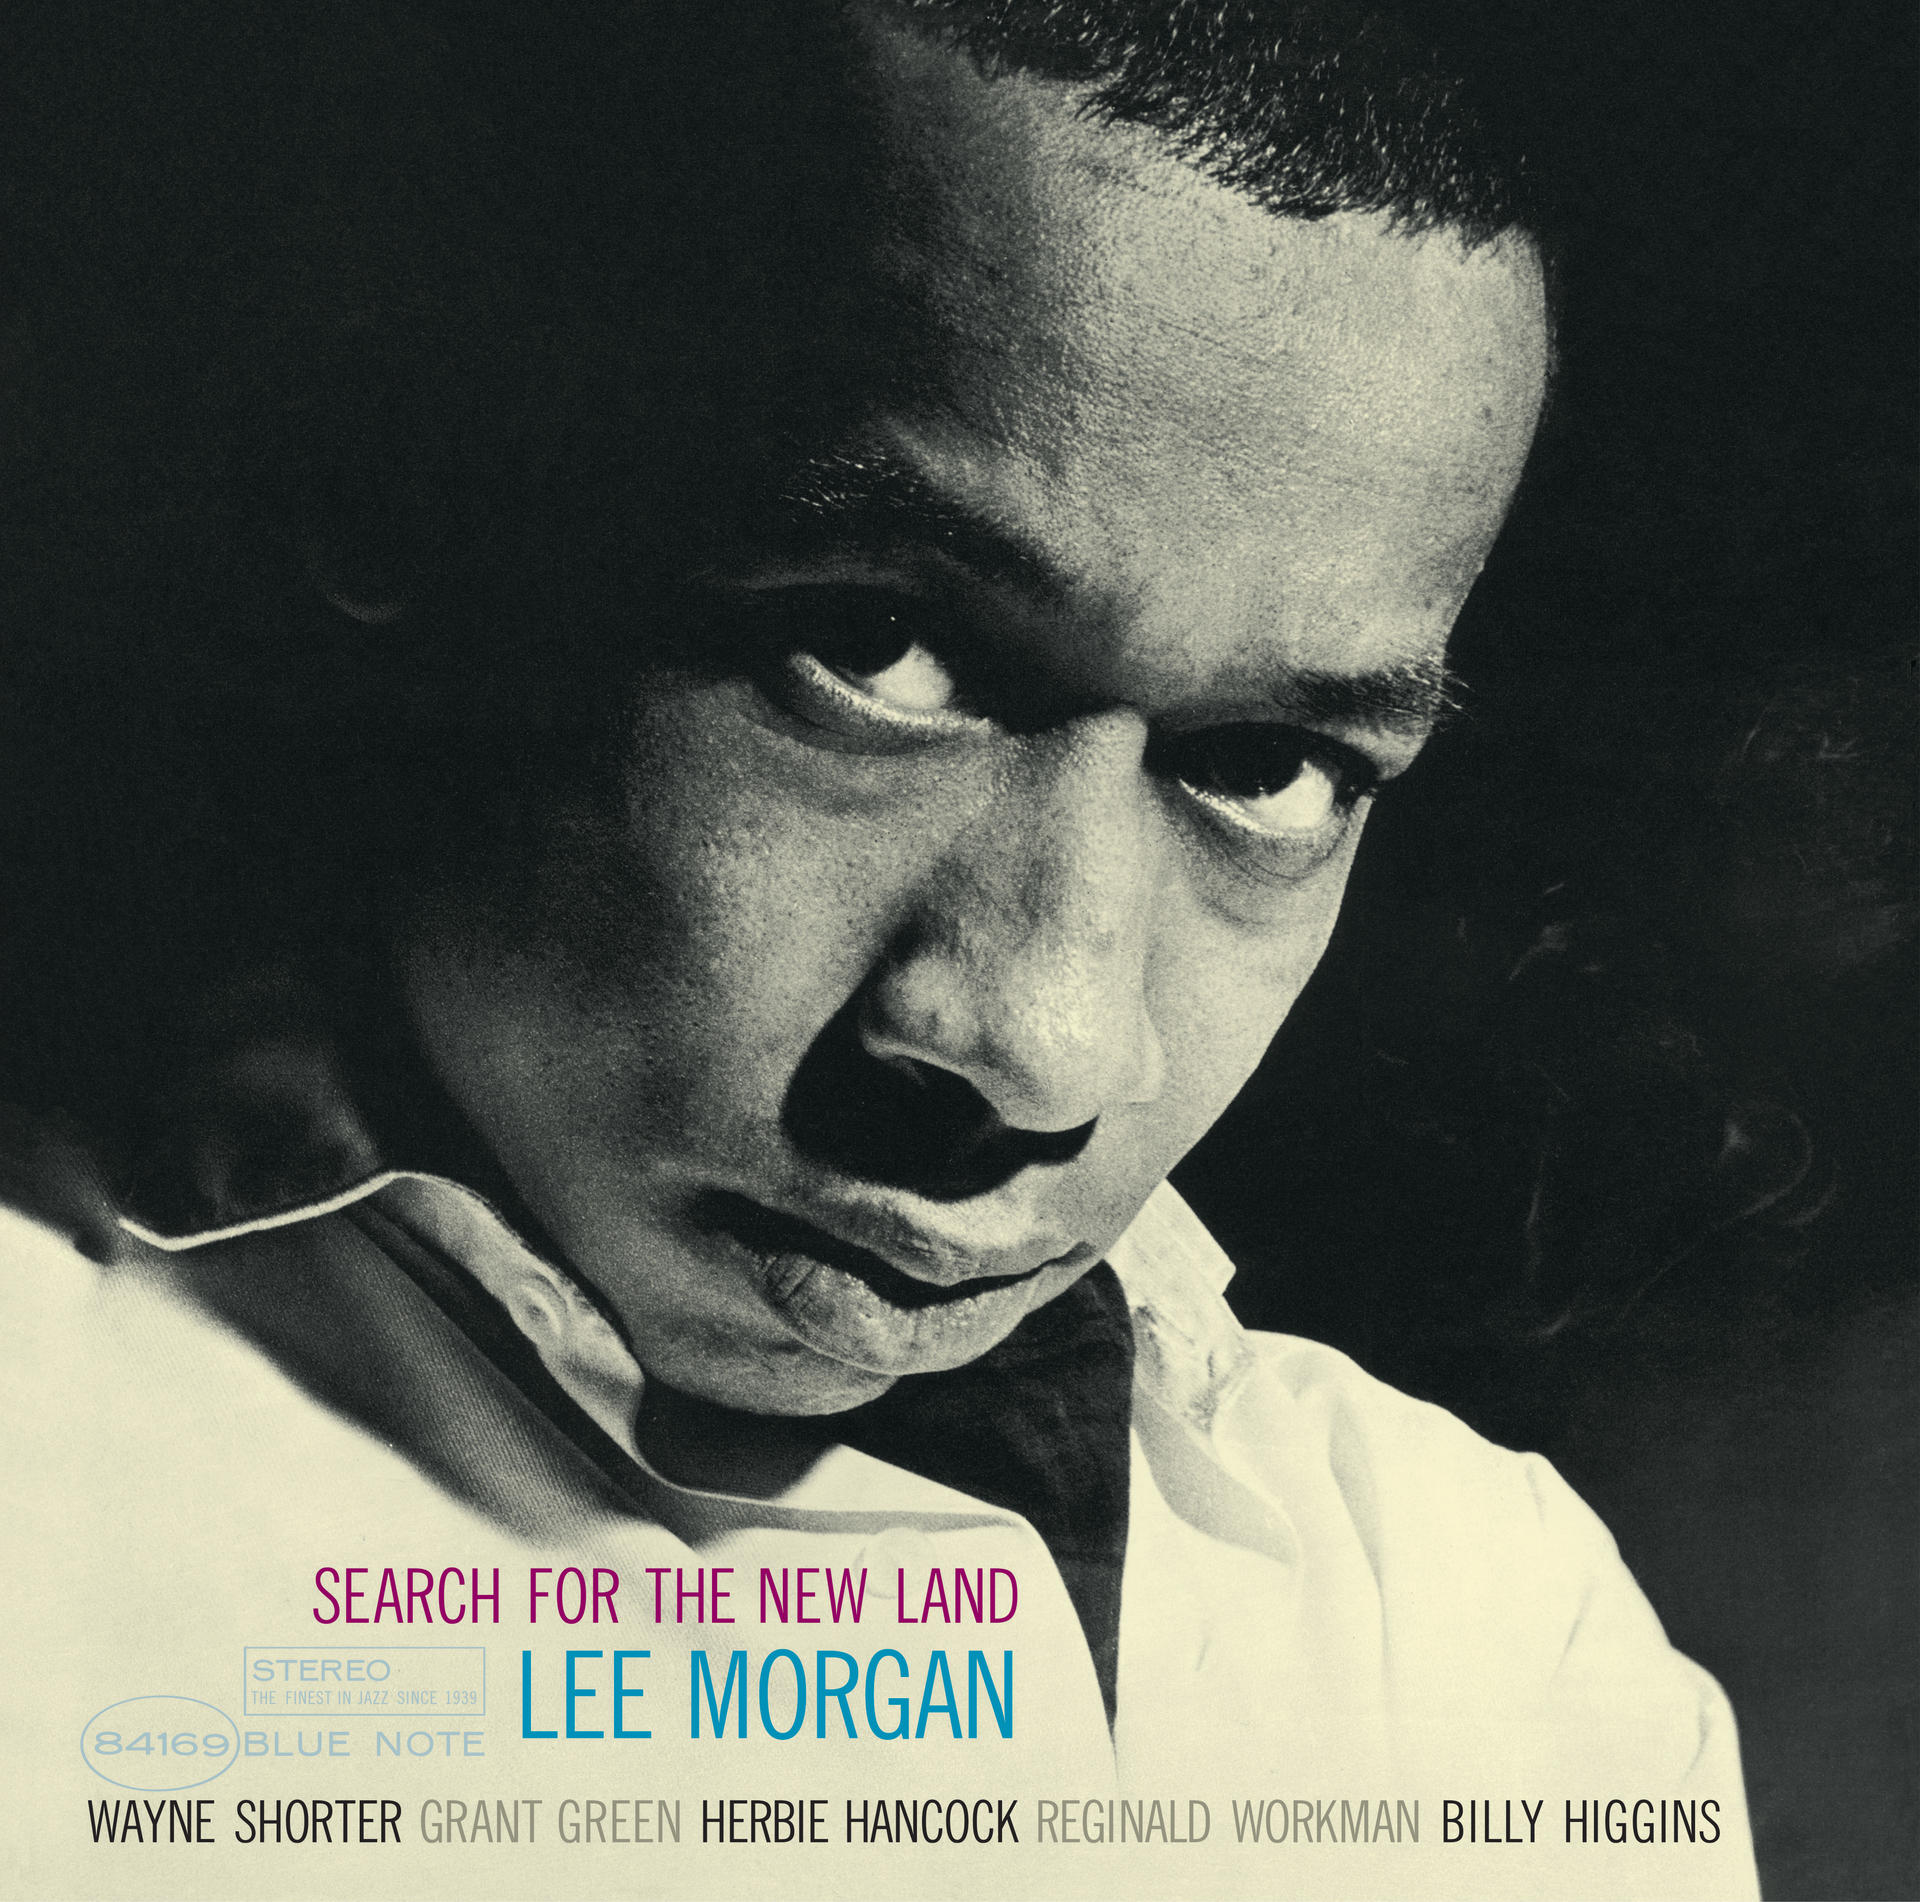 (Vinyl) Land Search - - Lee for Morgan the New